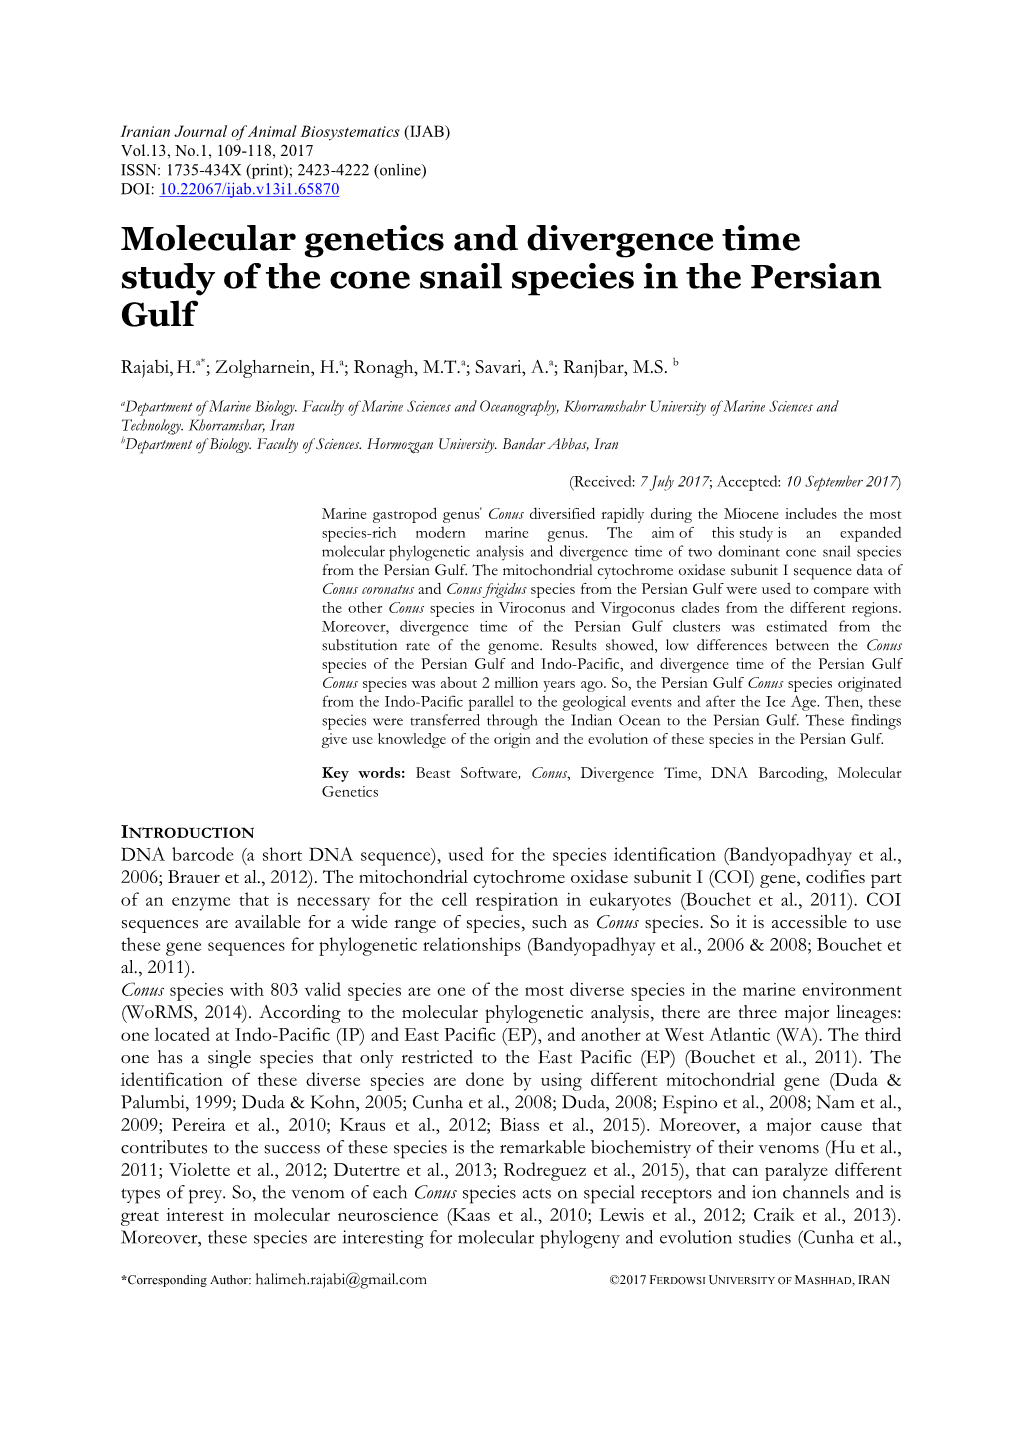 Molecular Genetics and Divergence Time Study of the Cone Snail Species in the Persian Gulf